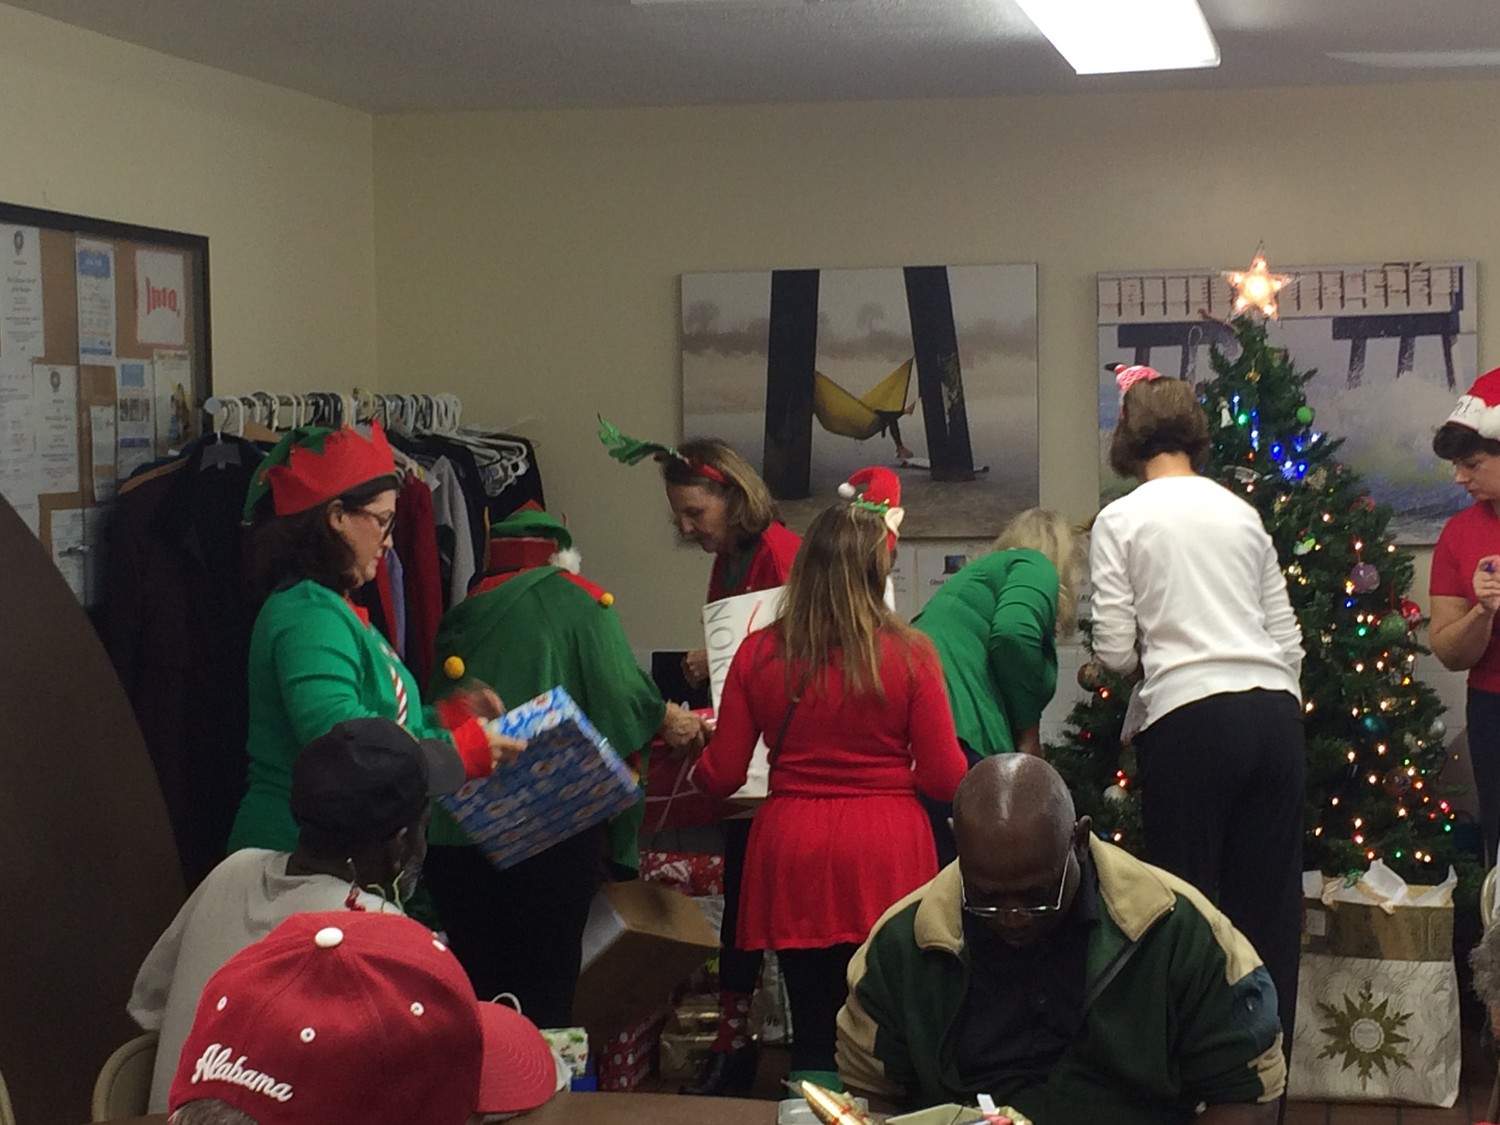 Mission House volunteers pass out presents to awaiting Mission House visitors.